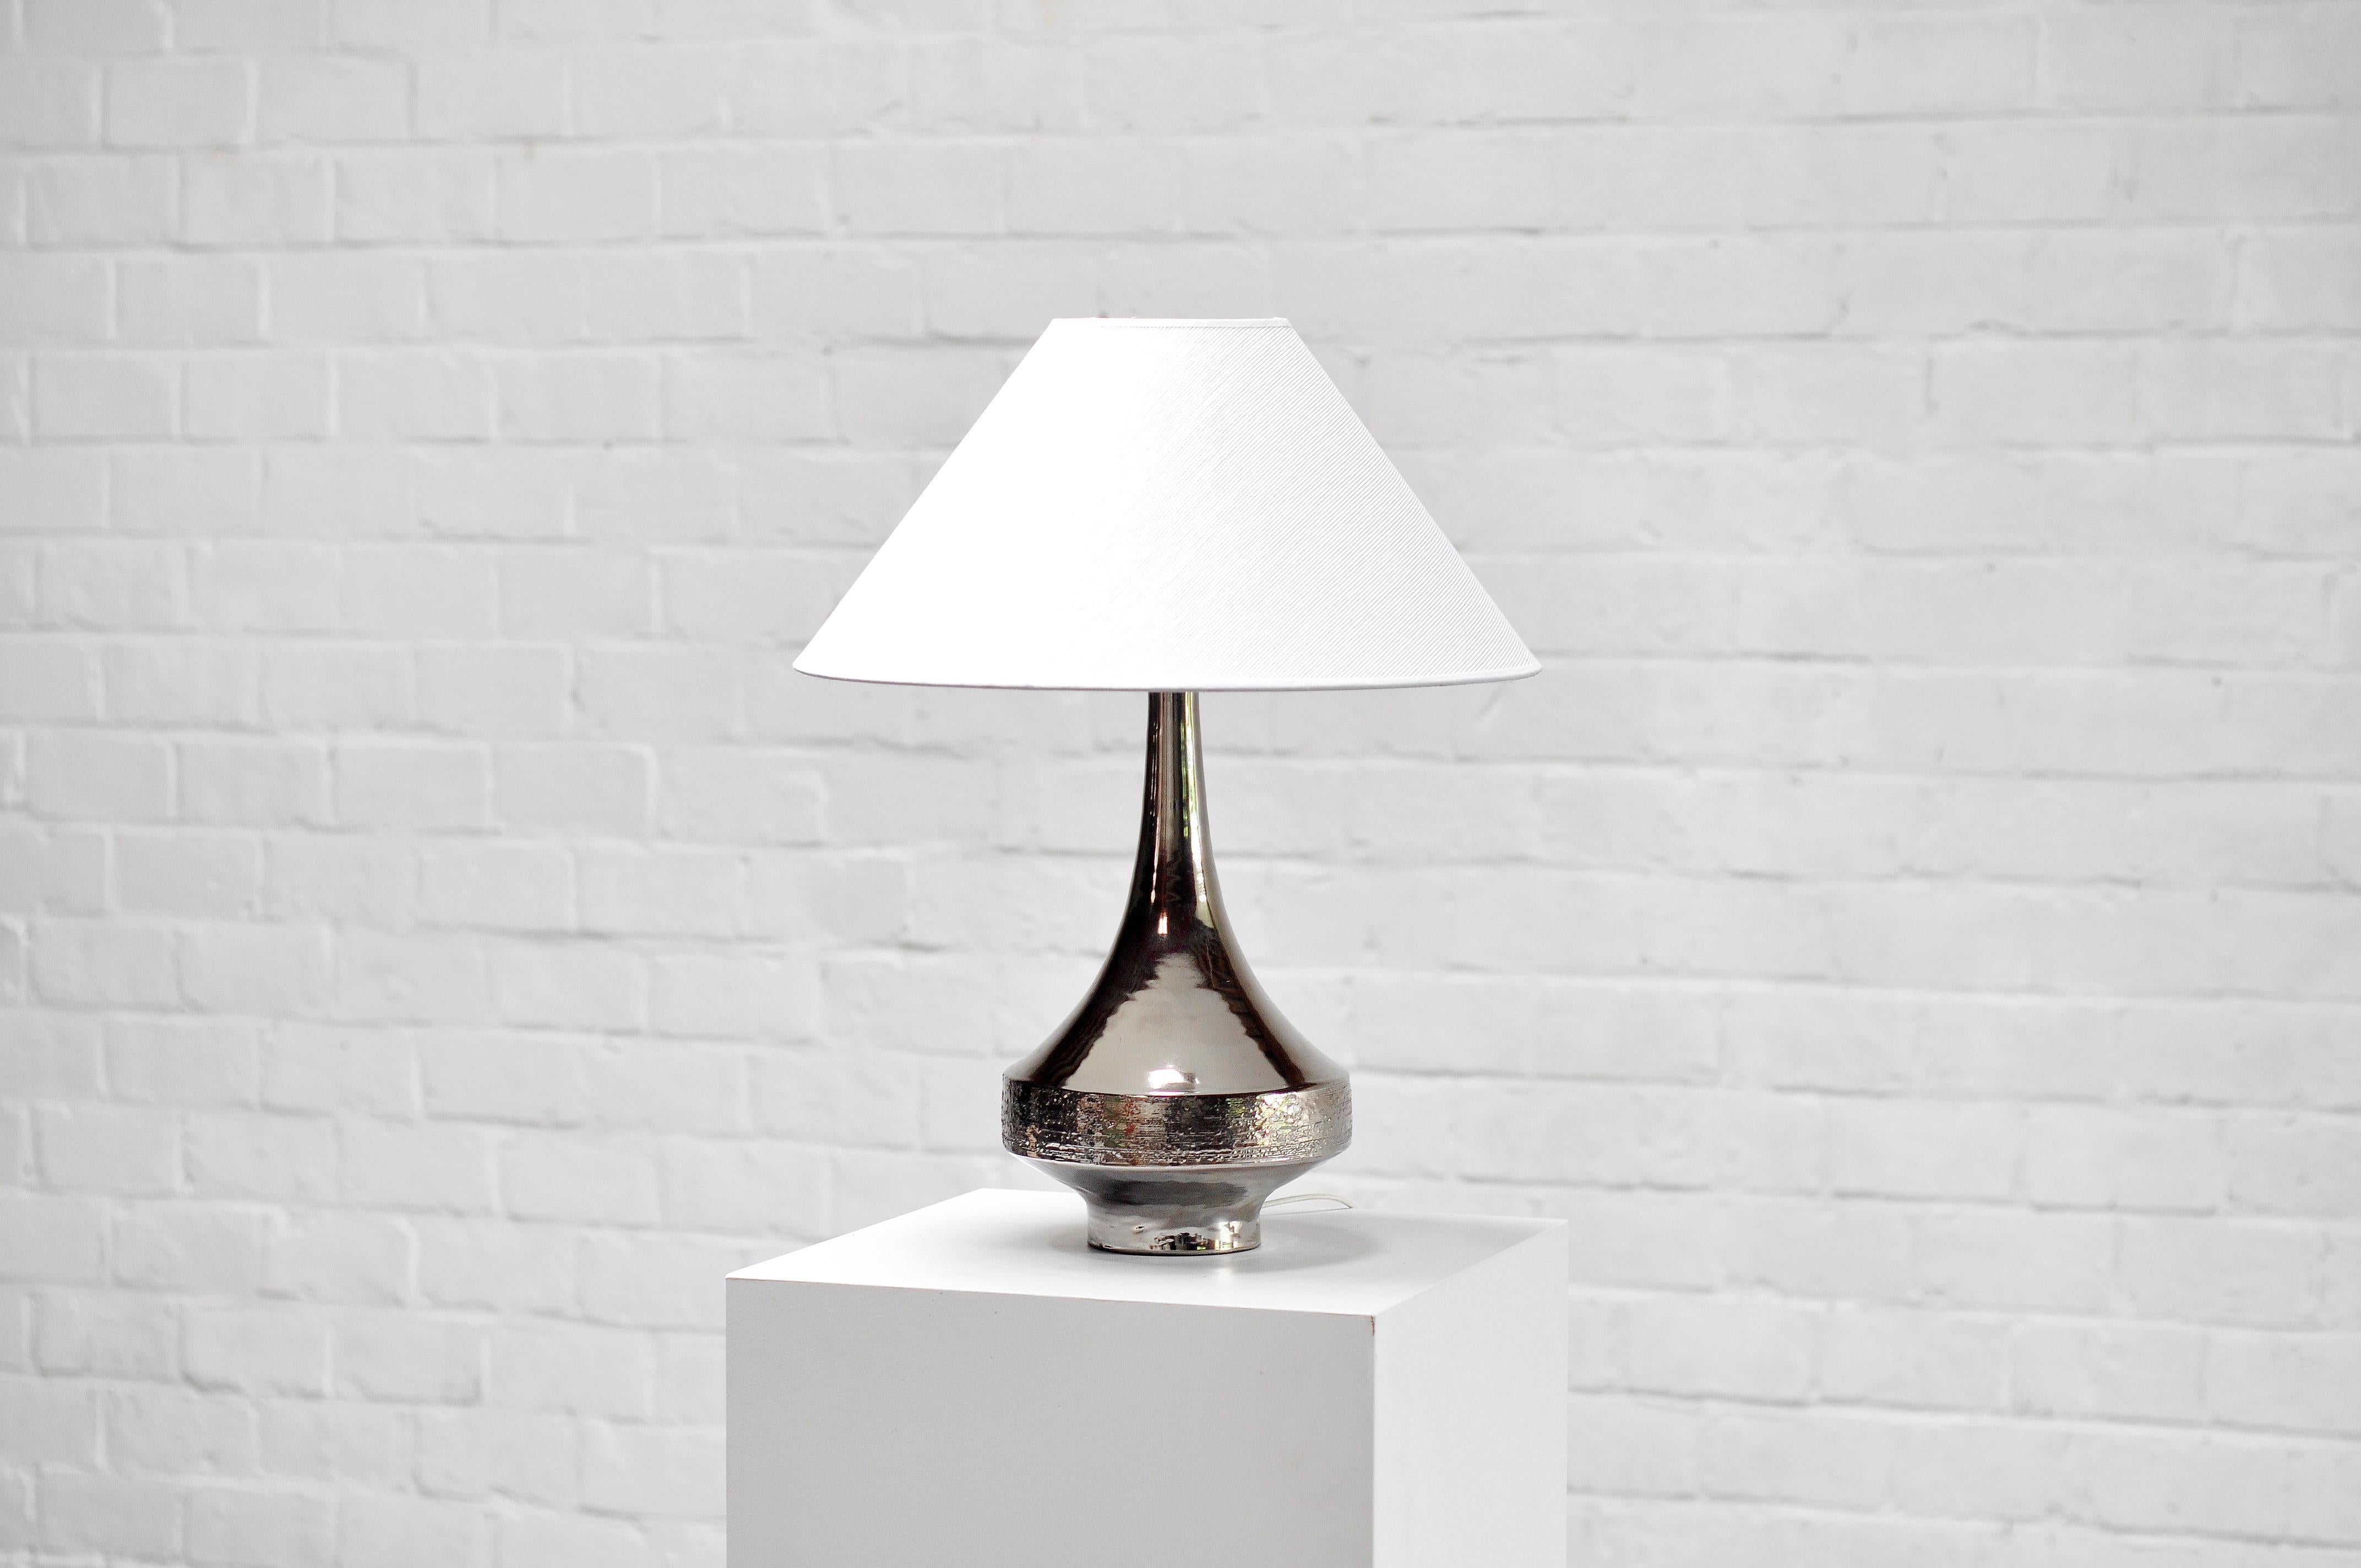 Late 20th Century Vintage Silver Enamelled Ceramic Table Lamp By Perignem, 1970s For Sale